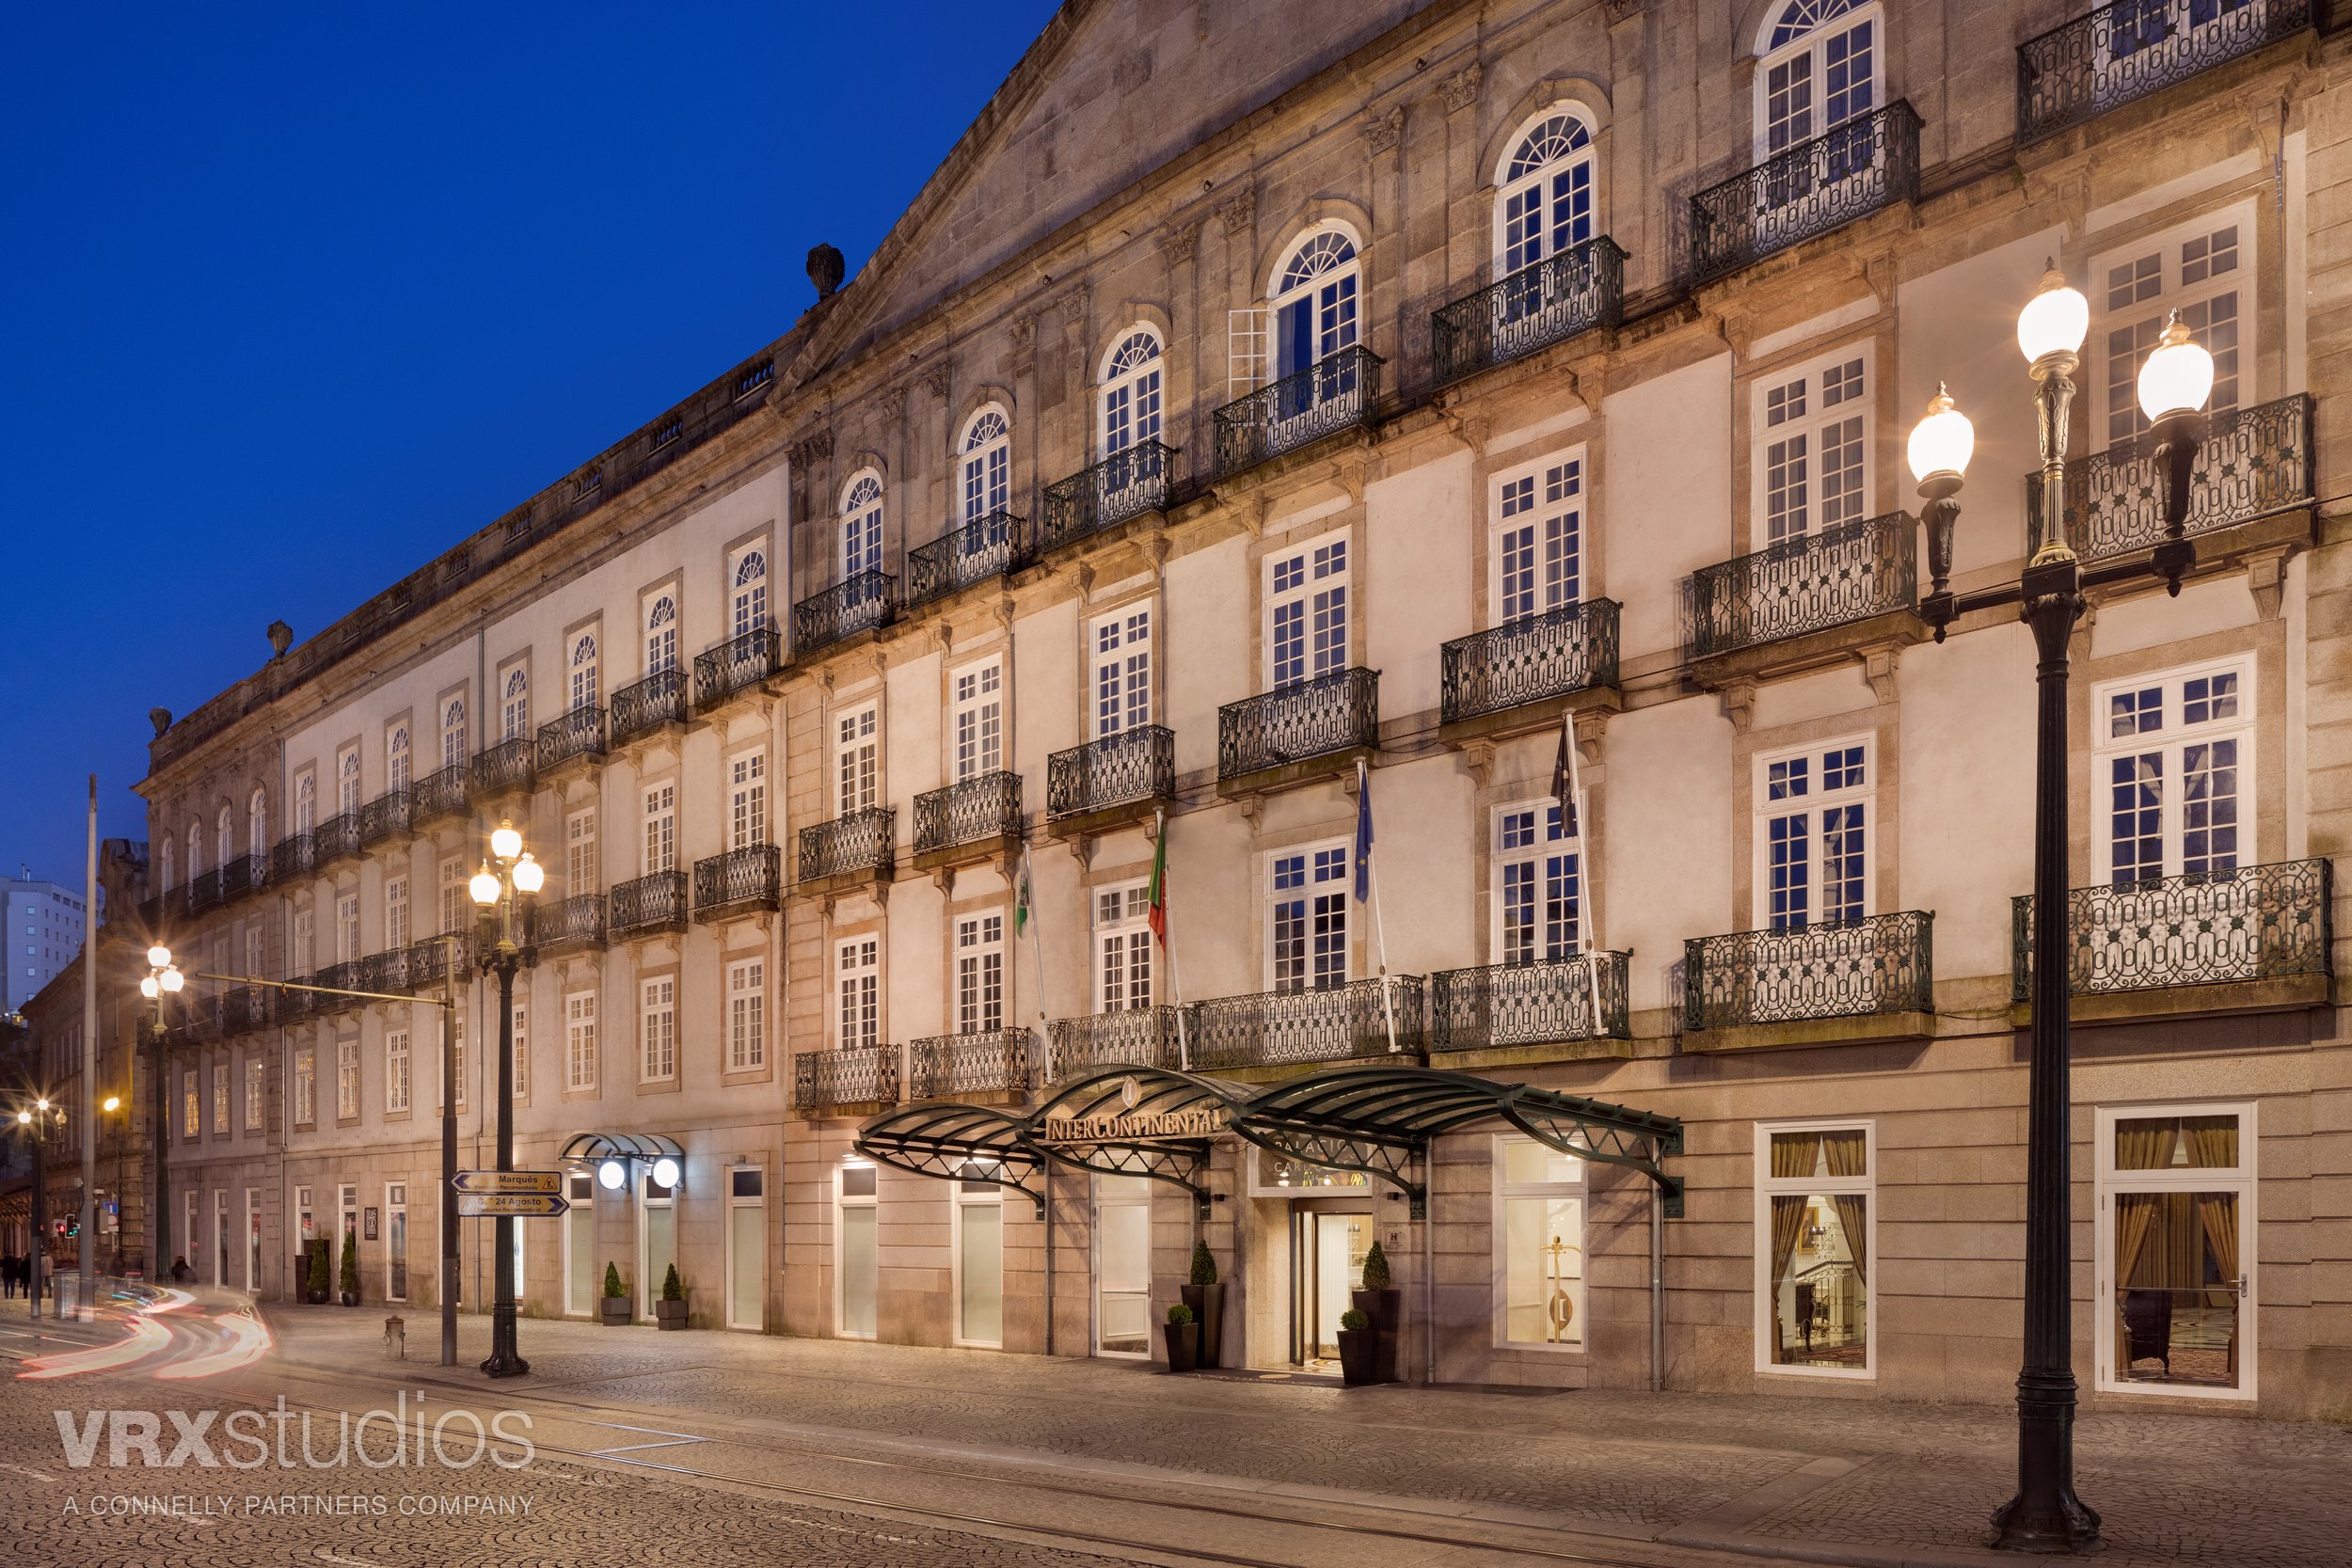  Client: VRX Studios • Project: Intercontinental Porto, Portugal • Photographer: Marcelo Barbosa • Produced by: VRX Studios 15/03/2020 